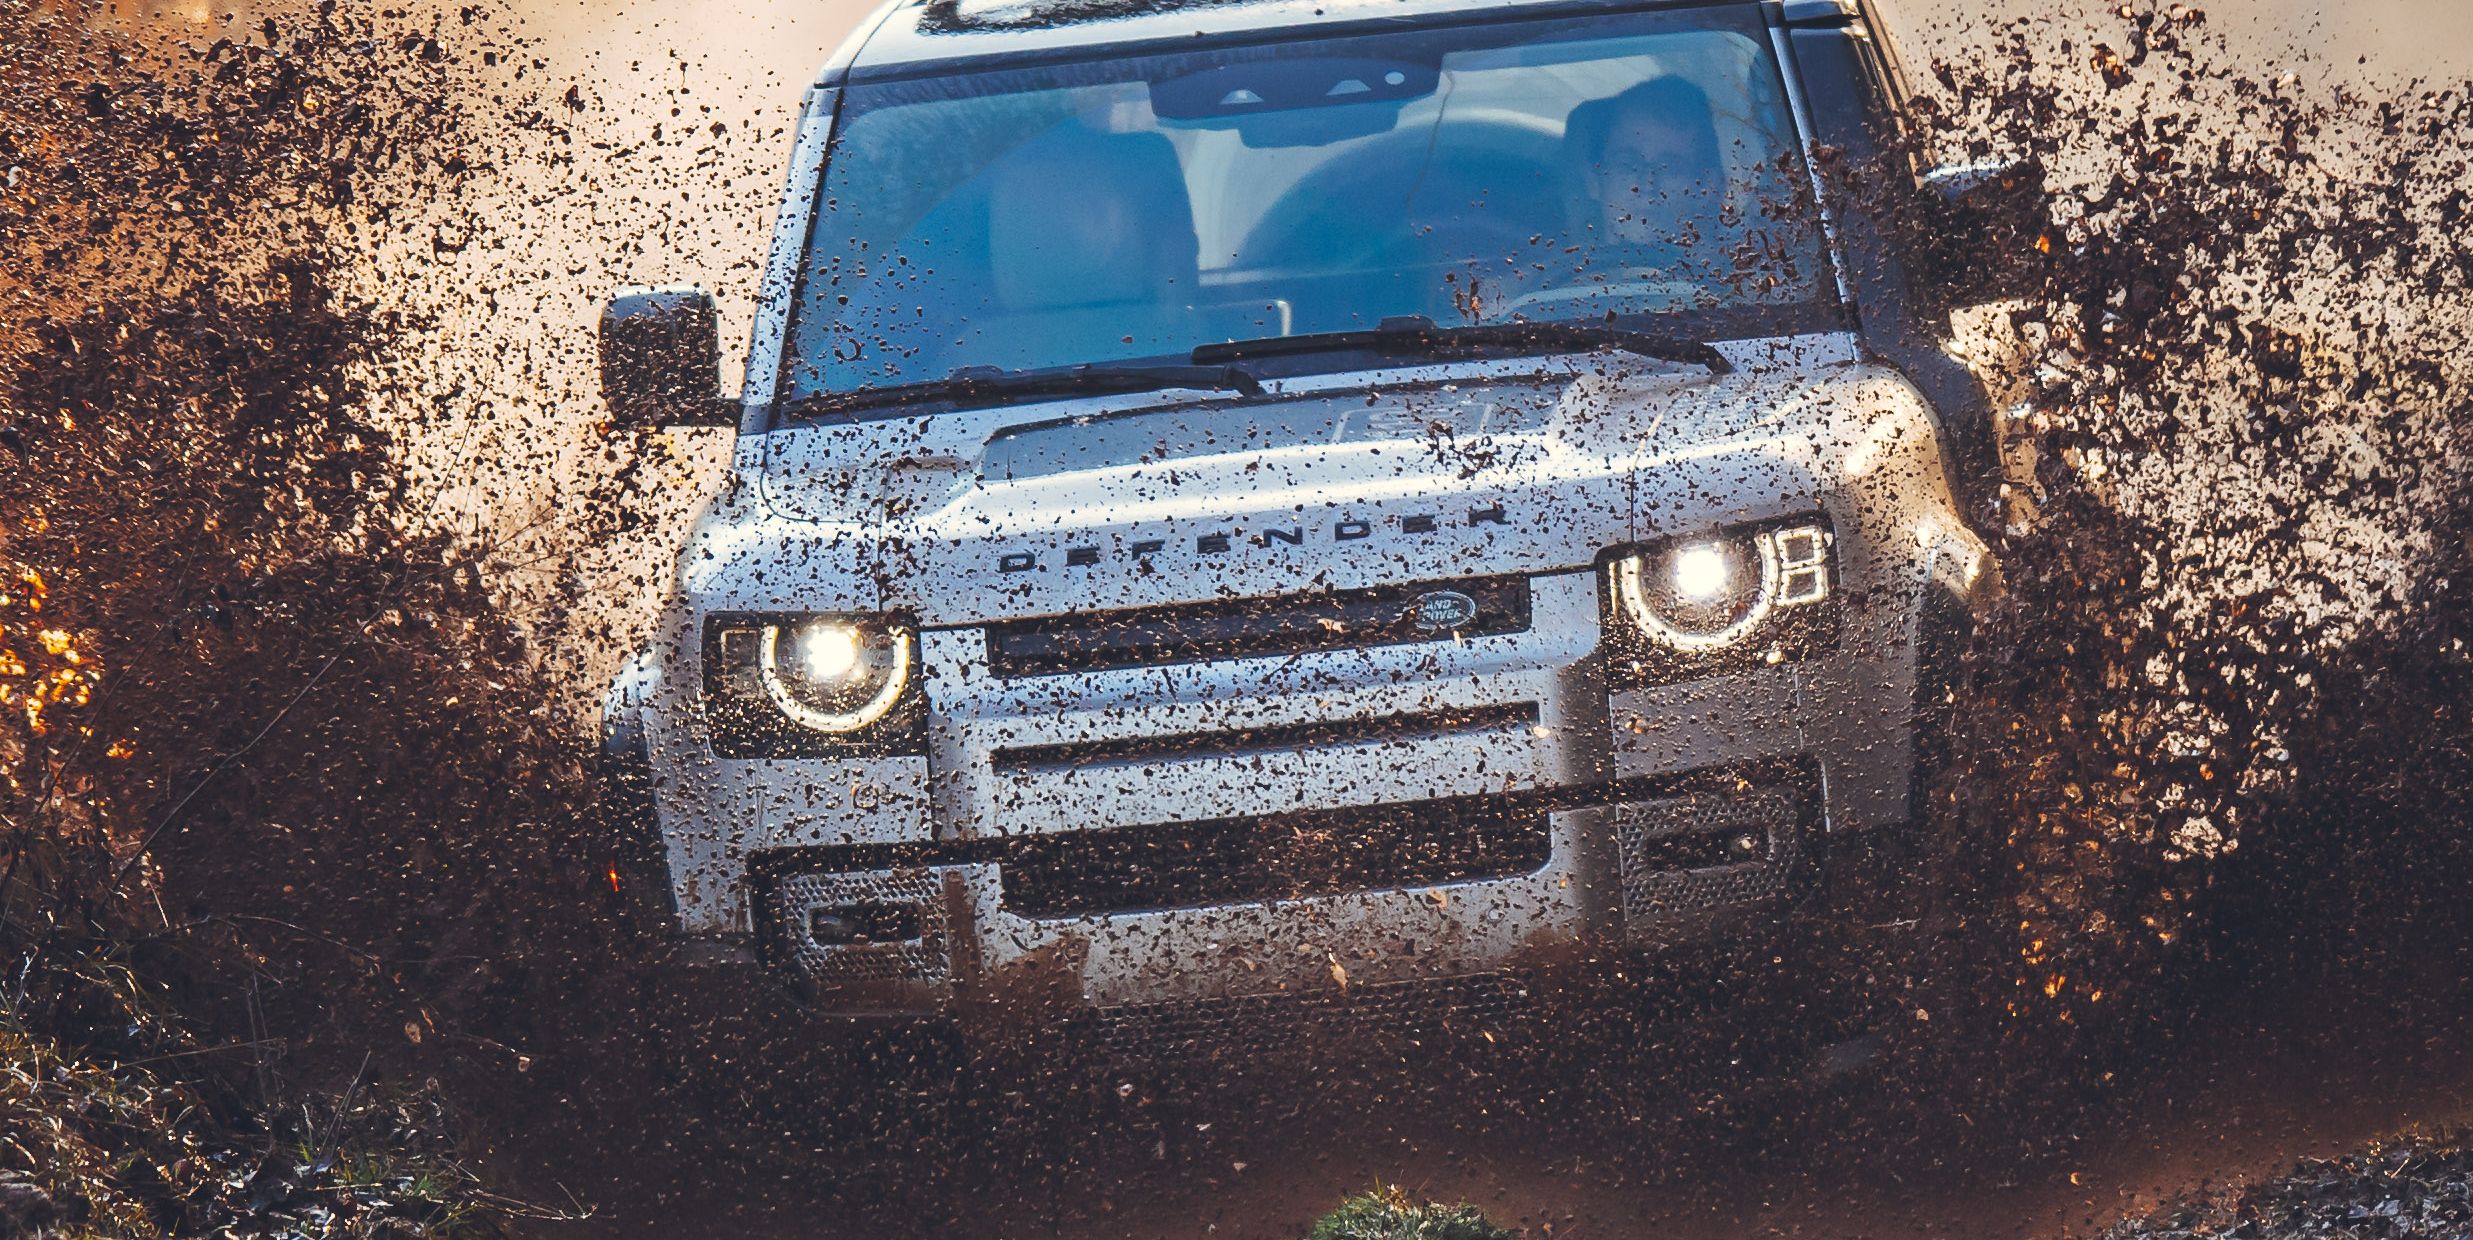 Smaller 'Baby' Defender Reportedly Coming to Land Rover Lineup in 2027